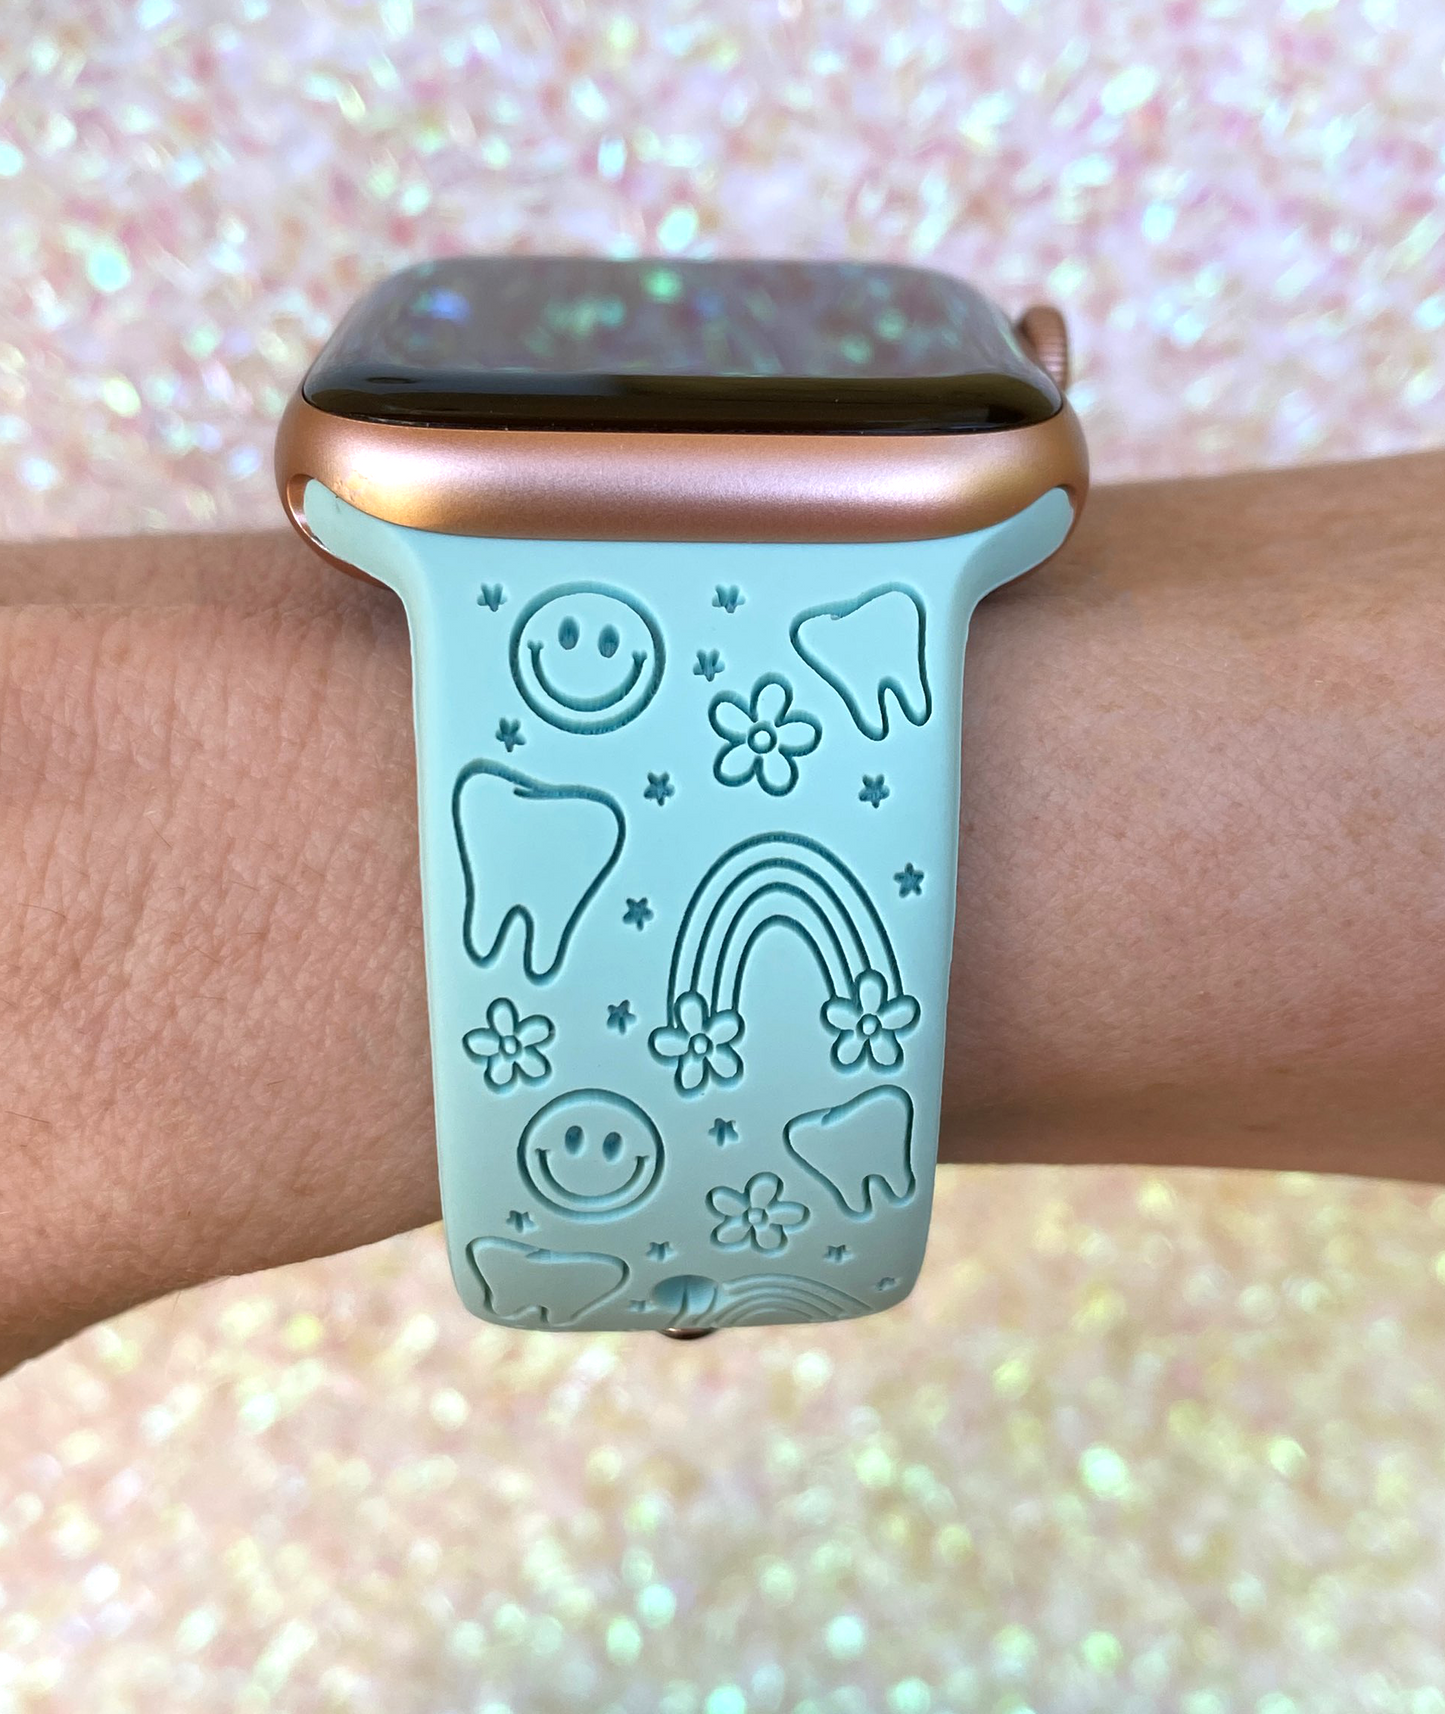 Smiley Dentist Apple Watch Band